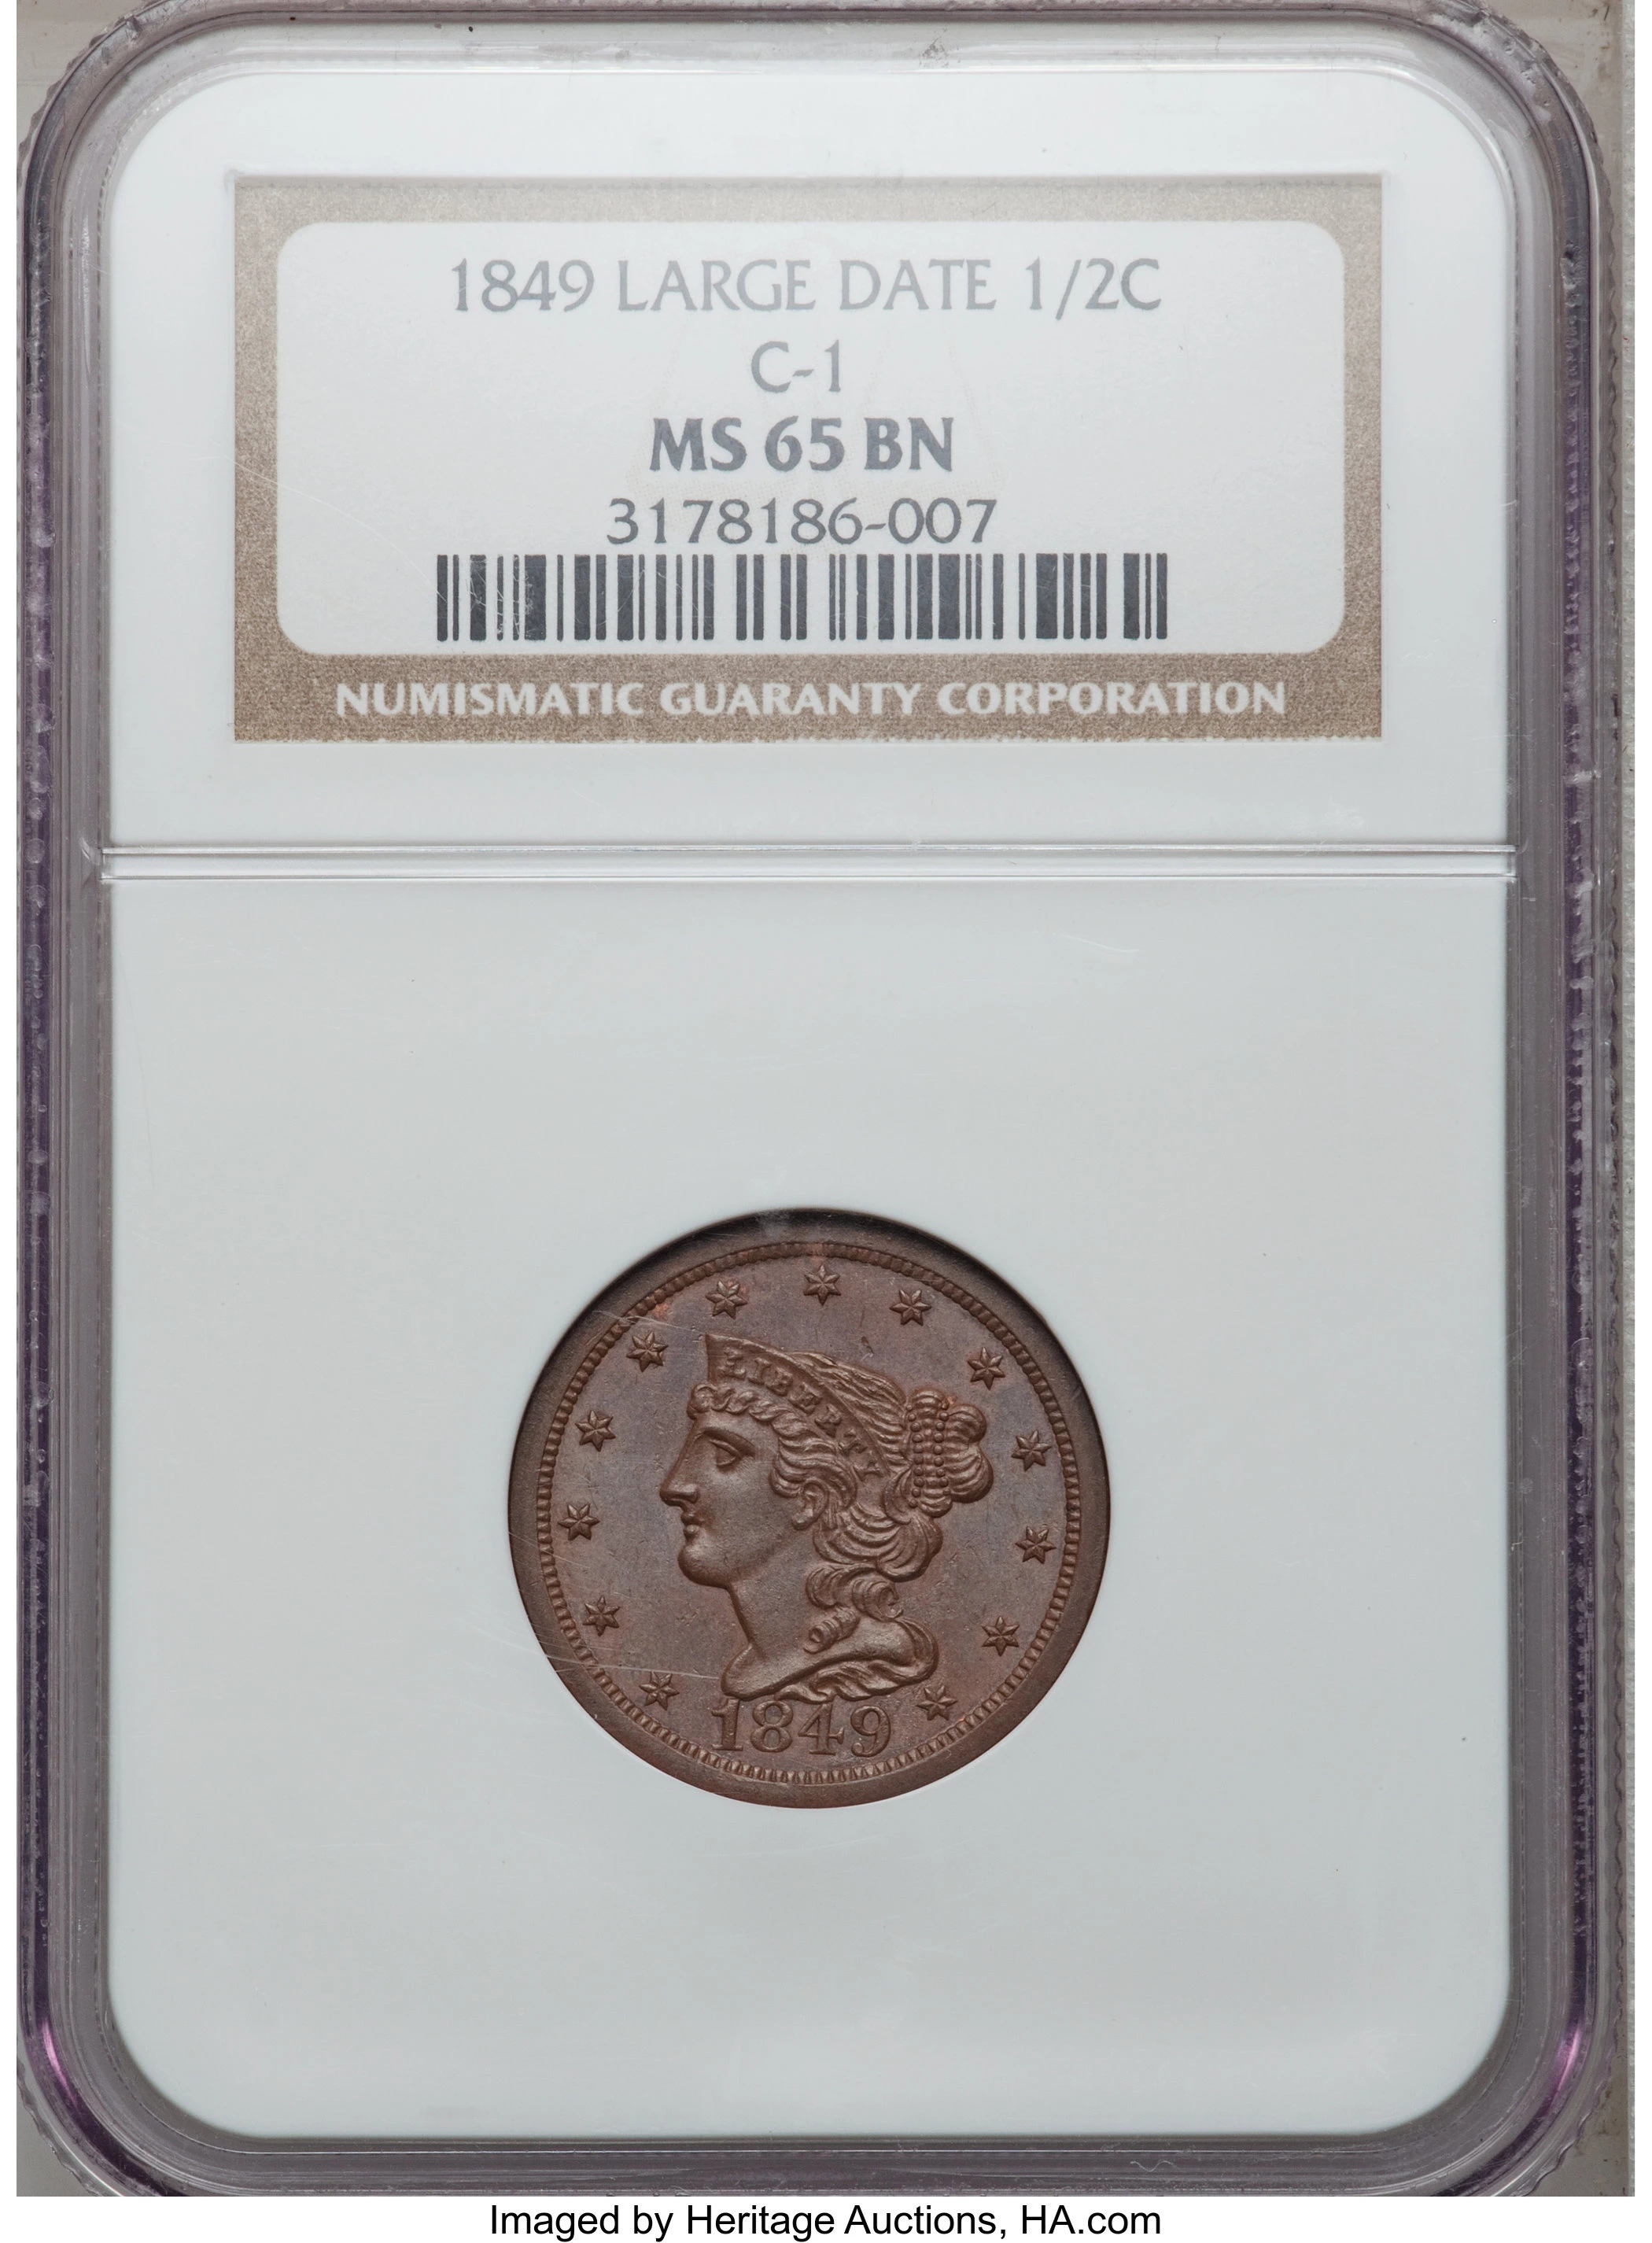 1857 1/2C Braided Hair Half Cent Key Date Low Mintage 35,180